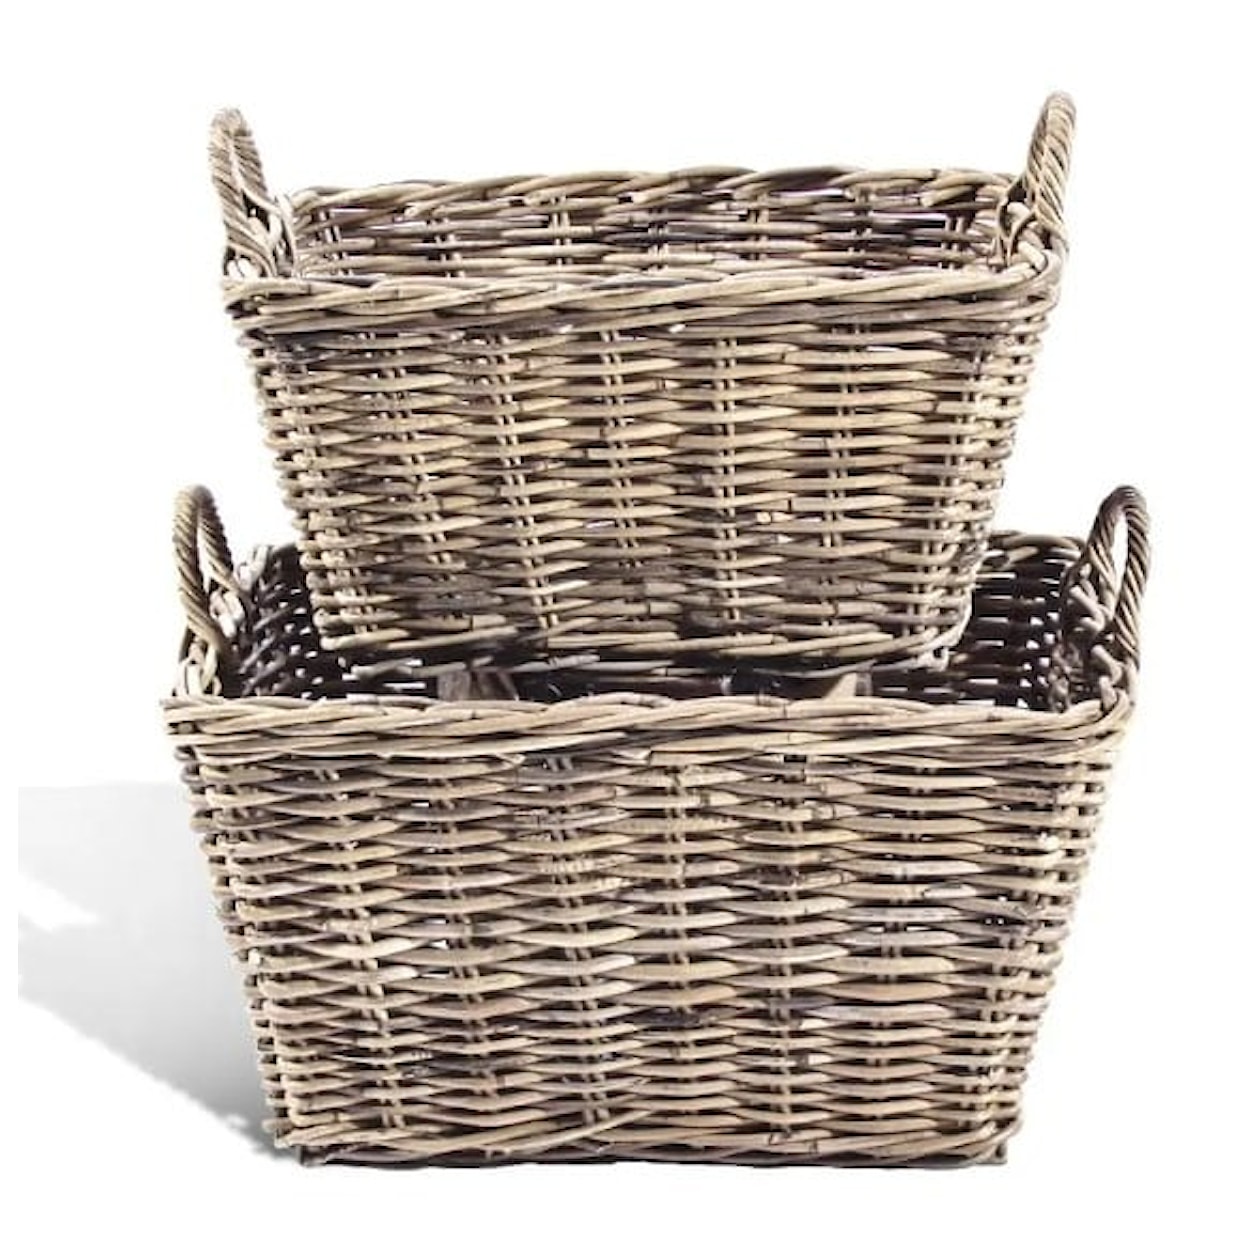 Ibolili Baskets and Sets FRENCH GRAY CLASSIC BASKET, RECT- S/2